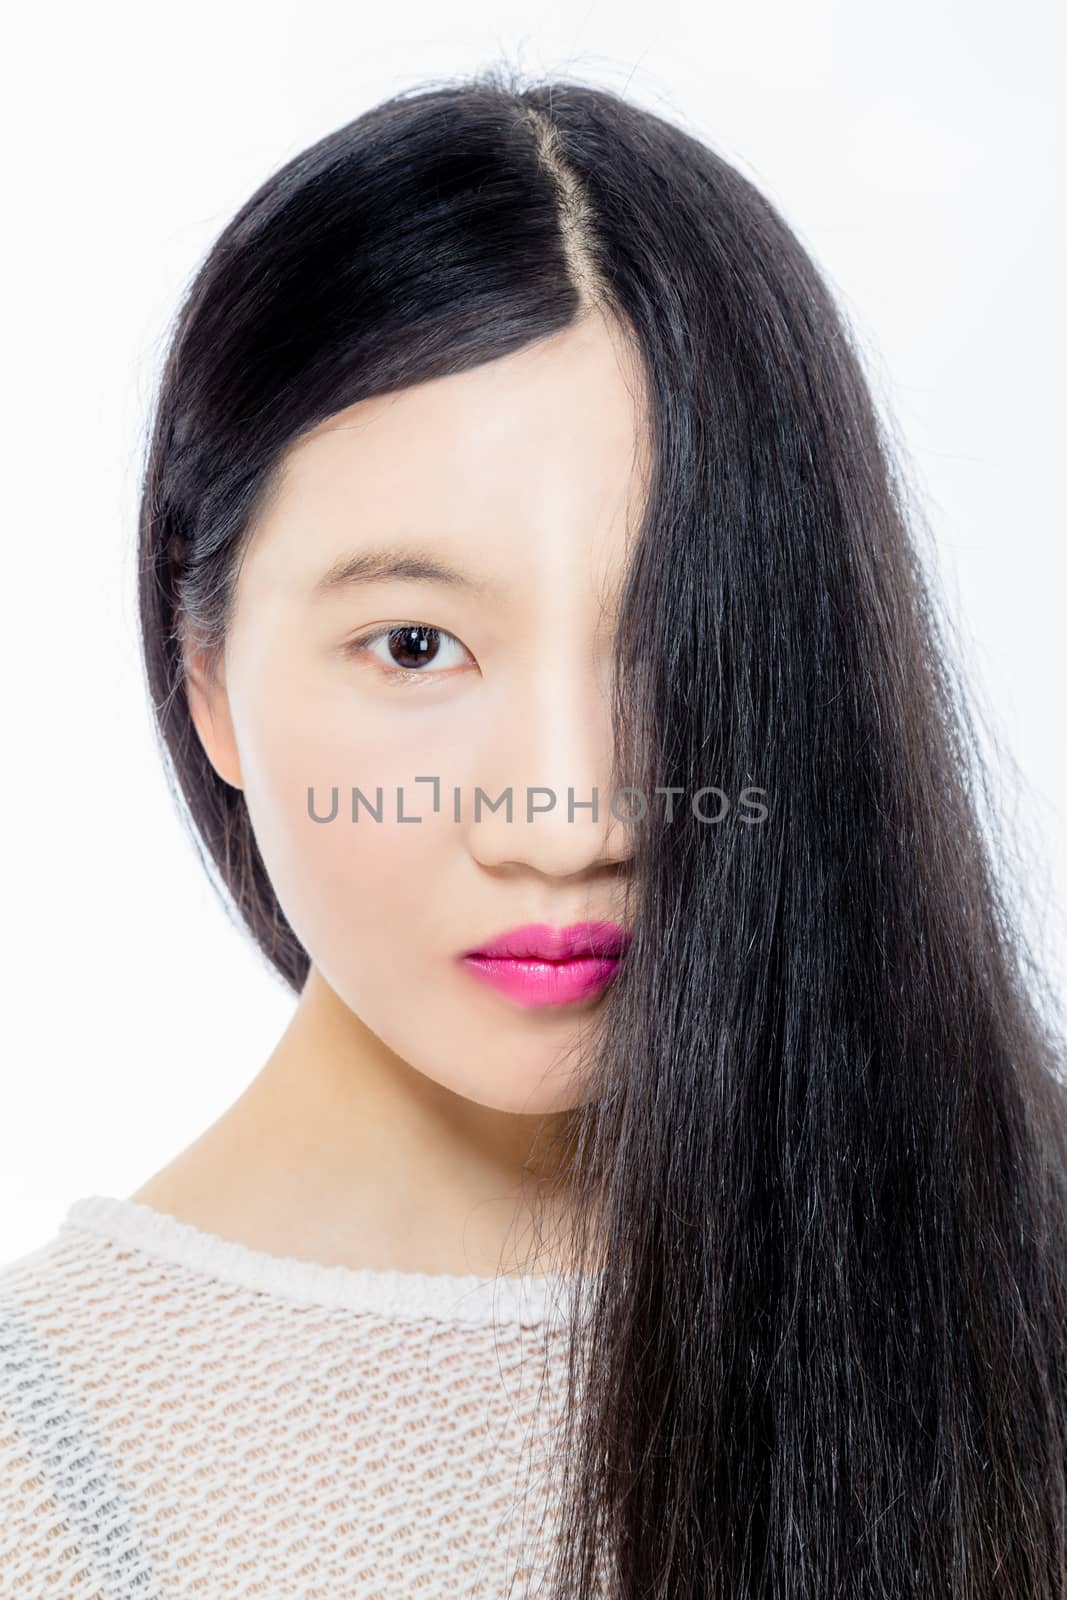 Teenage Asian American girl with hair covering half face